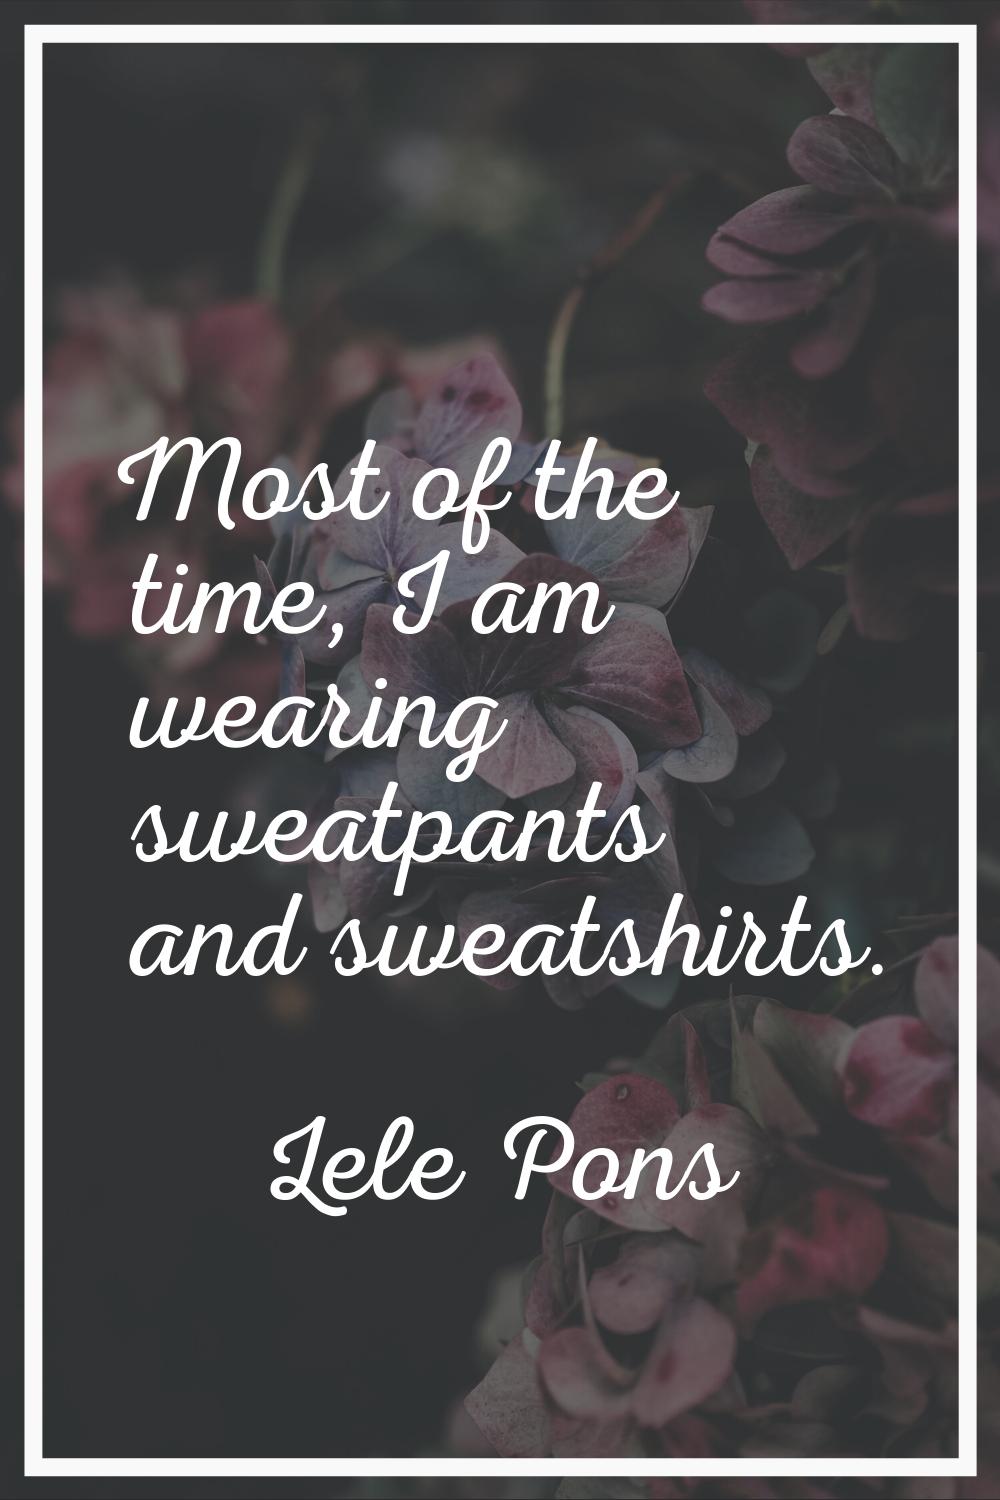 Most of the time, I am wearing sweatpants and sweatshirts.